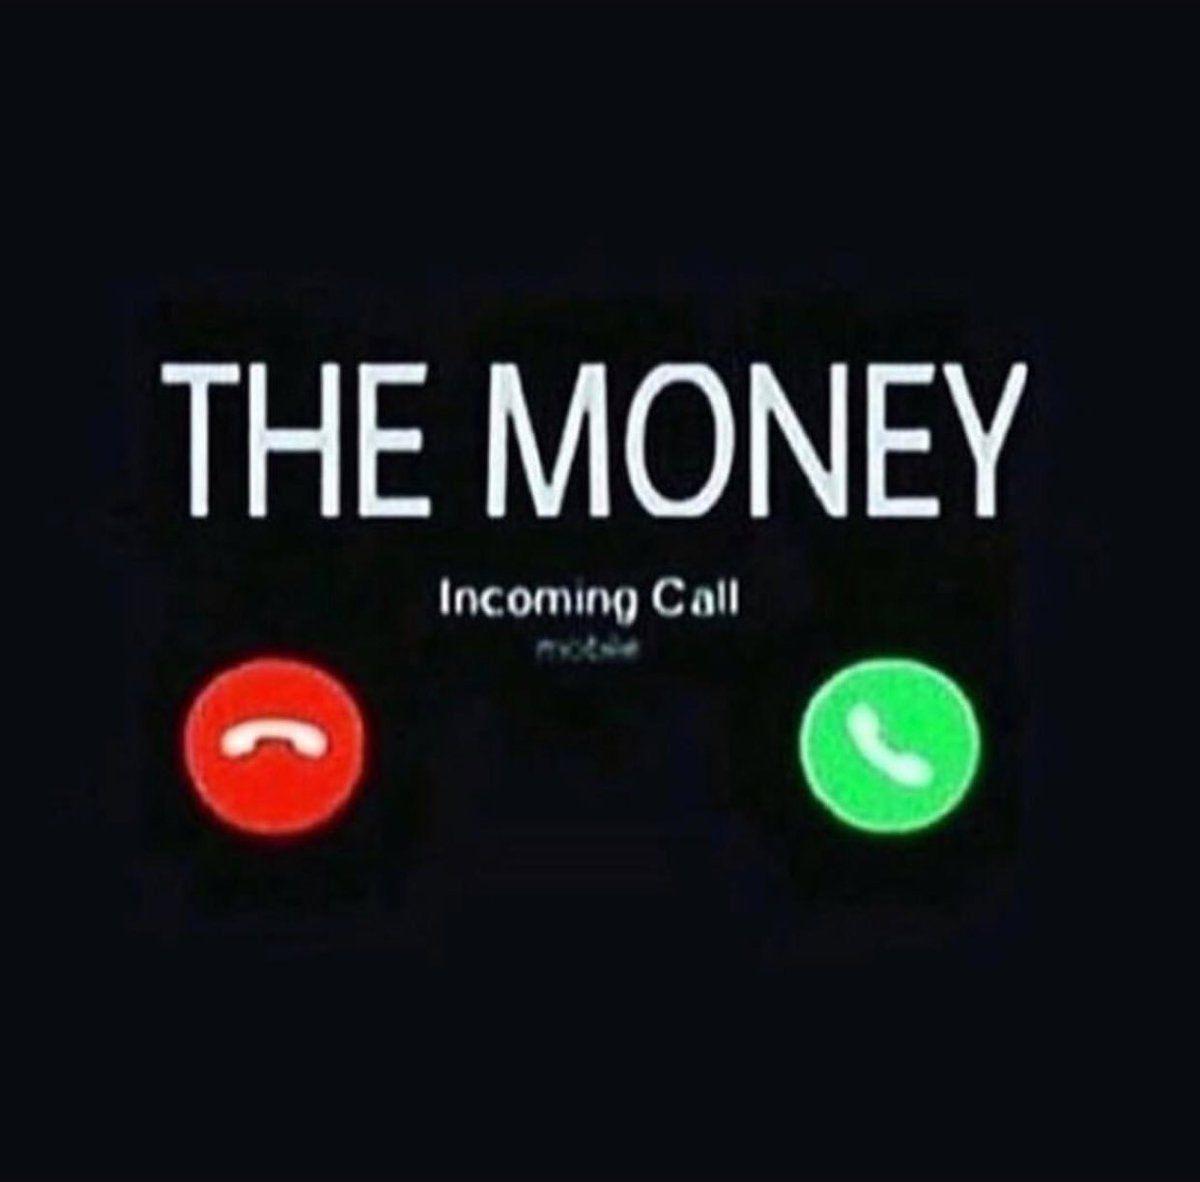 R.Kelly Logo - R. Kelly careful of the calls you're answering. Most